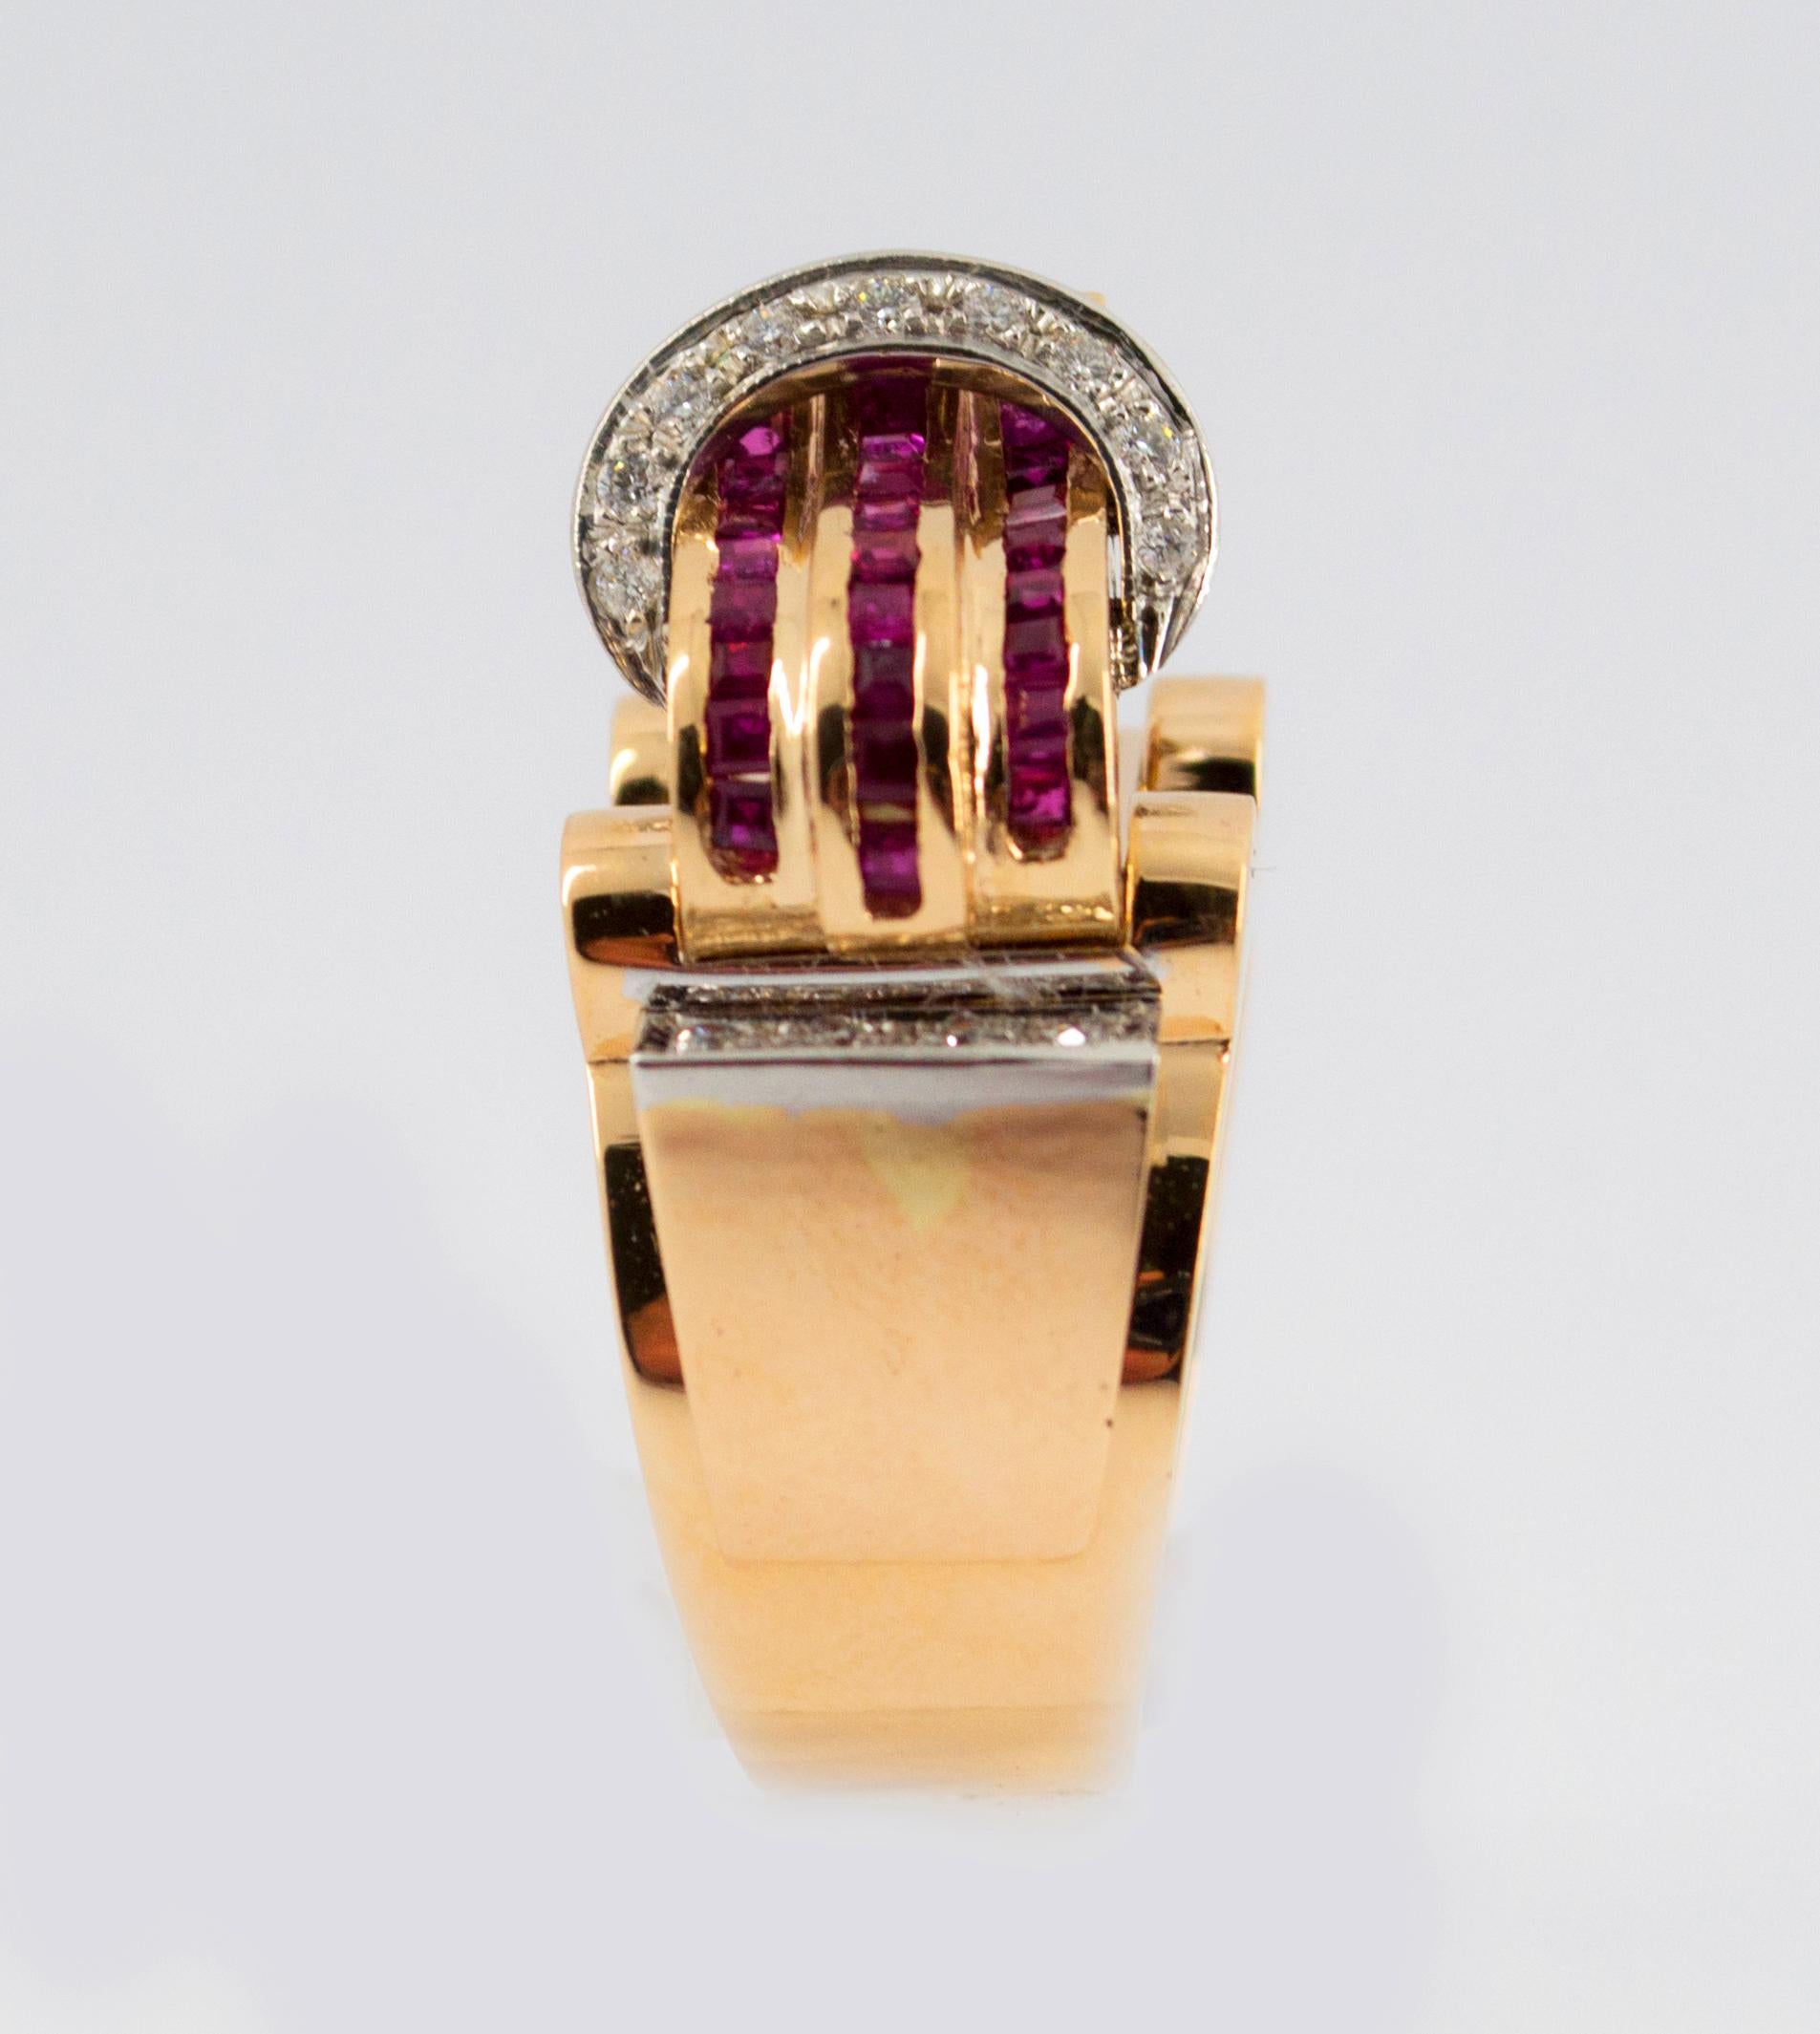 This Ring is made of 14K Yellow Gold.
This Ring has 0.35 Carats of White Diamonds.
This Ring has 1.00 Carats of Carre Cut Rubies.
We can also make it with Blue Sapphires or Emeralds.
This Ring is a Poison Ring inspired by Renaissance.
Size ITA: 15